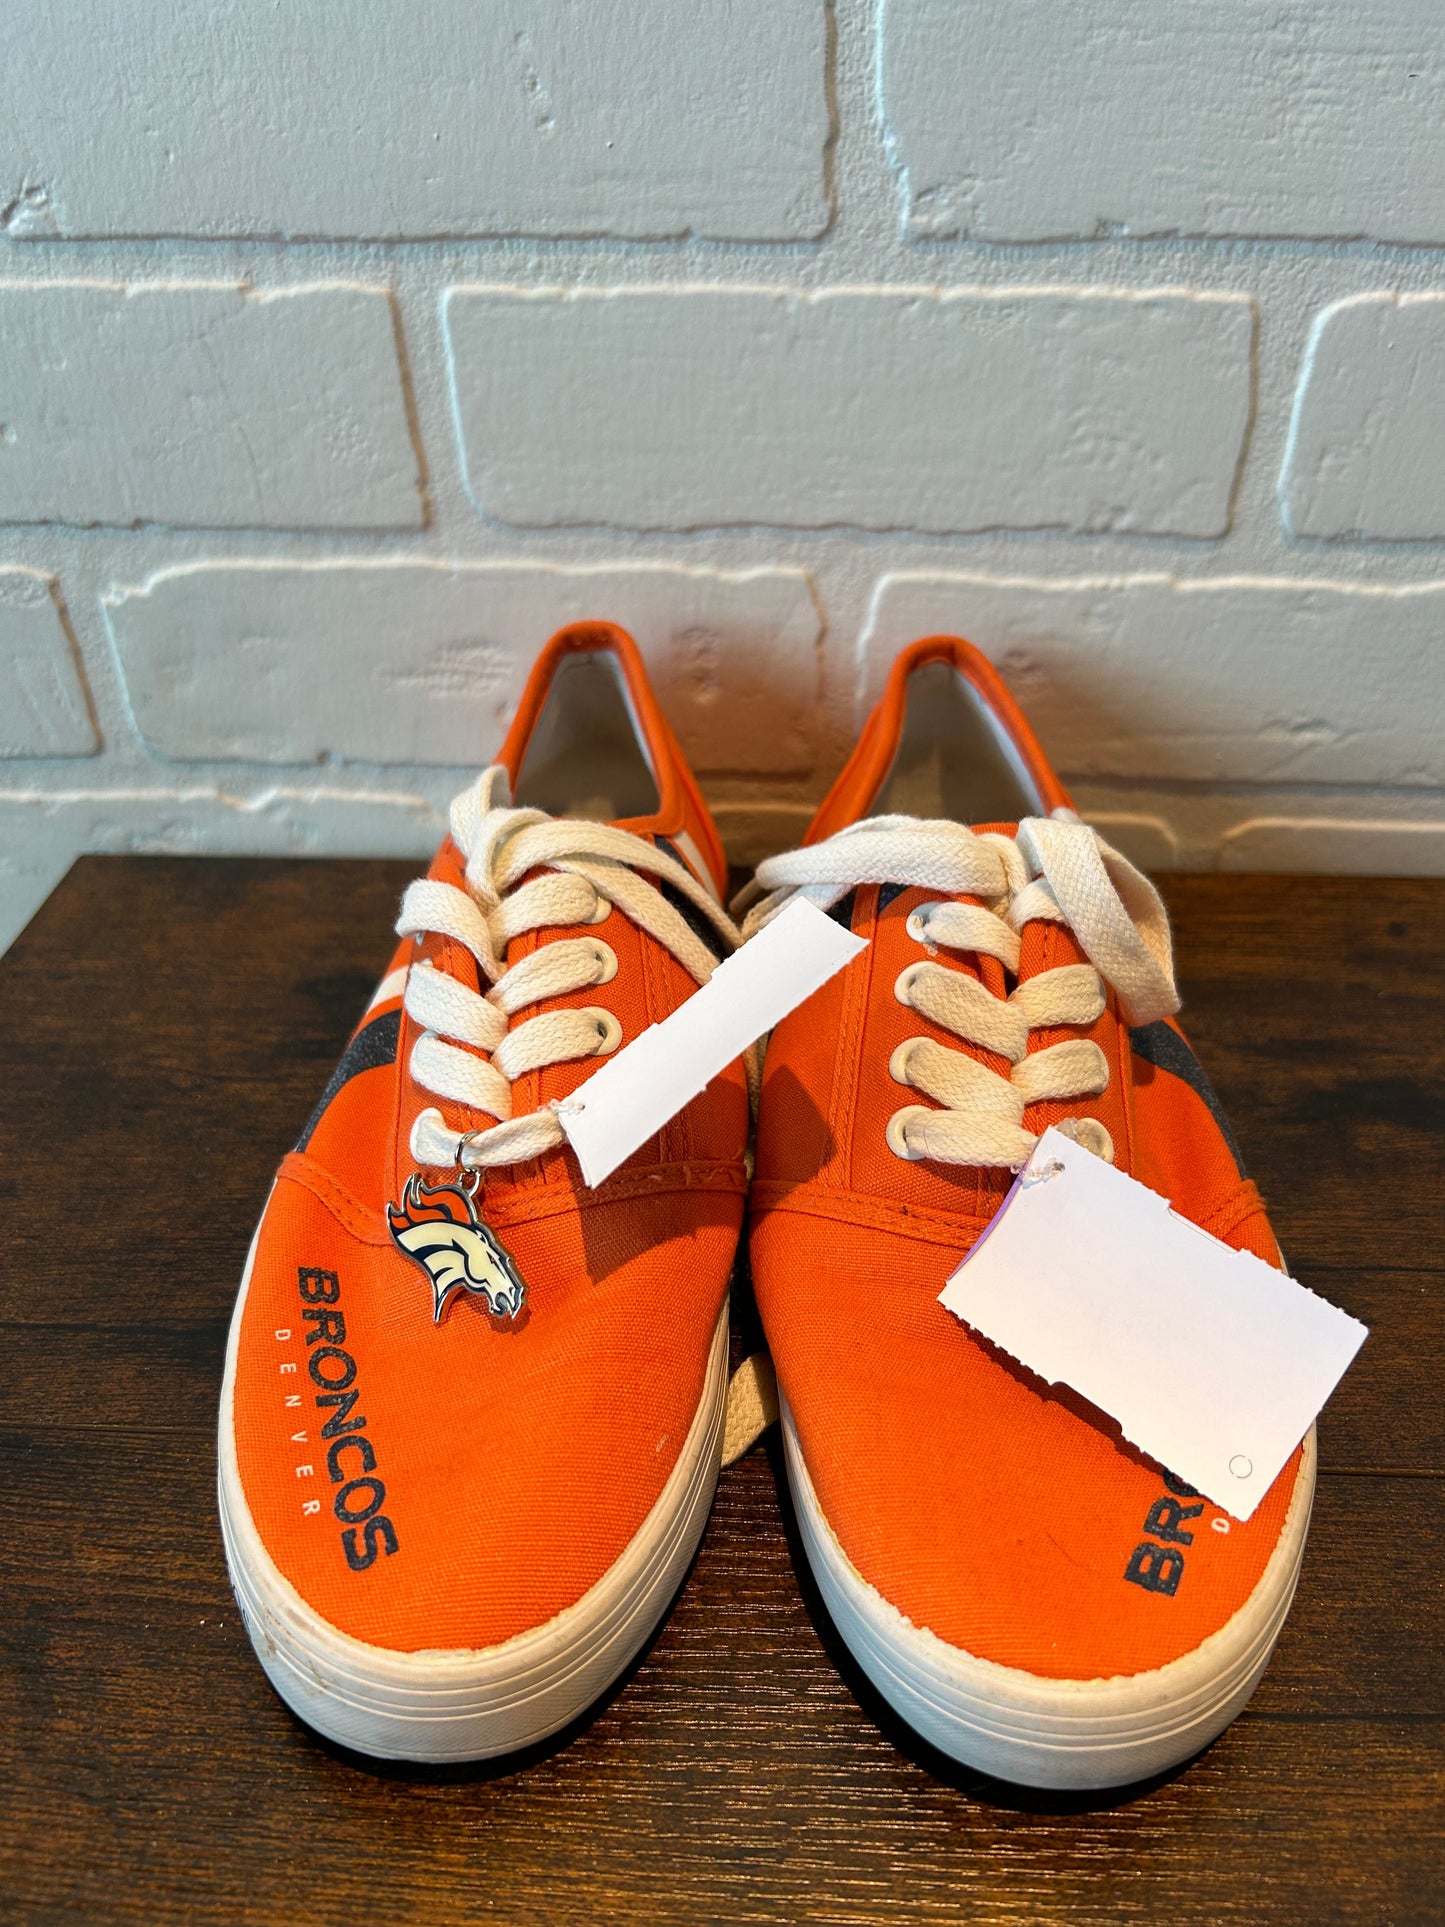 Orange Shoes Sneakers Clothes Mentor, Size 8